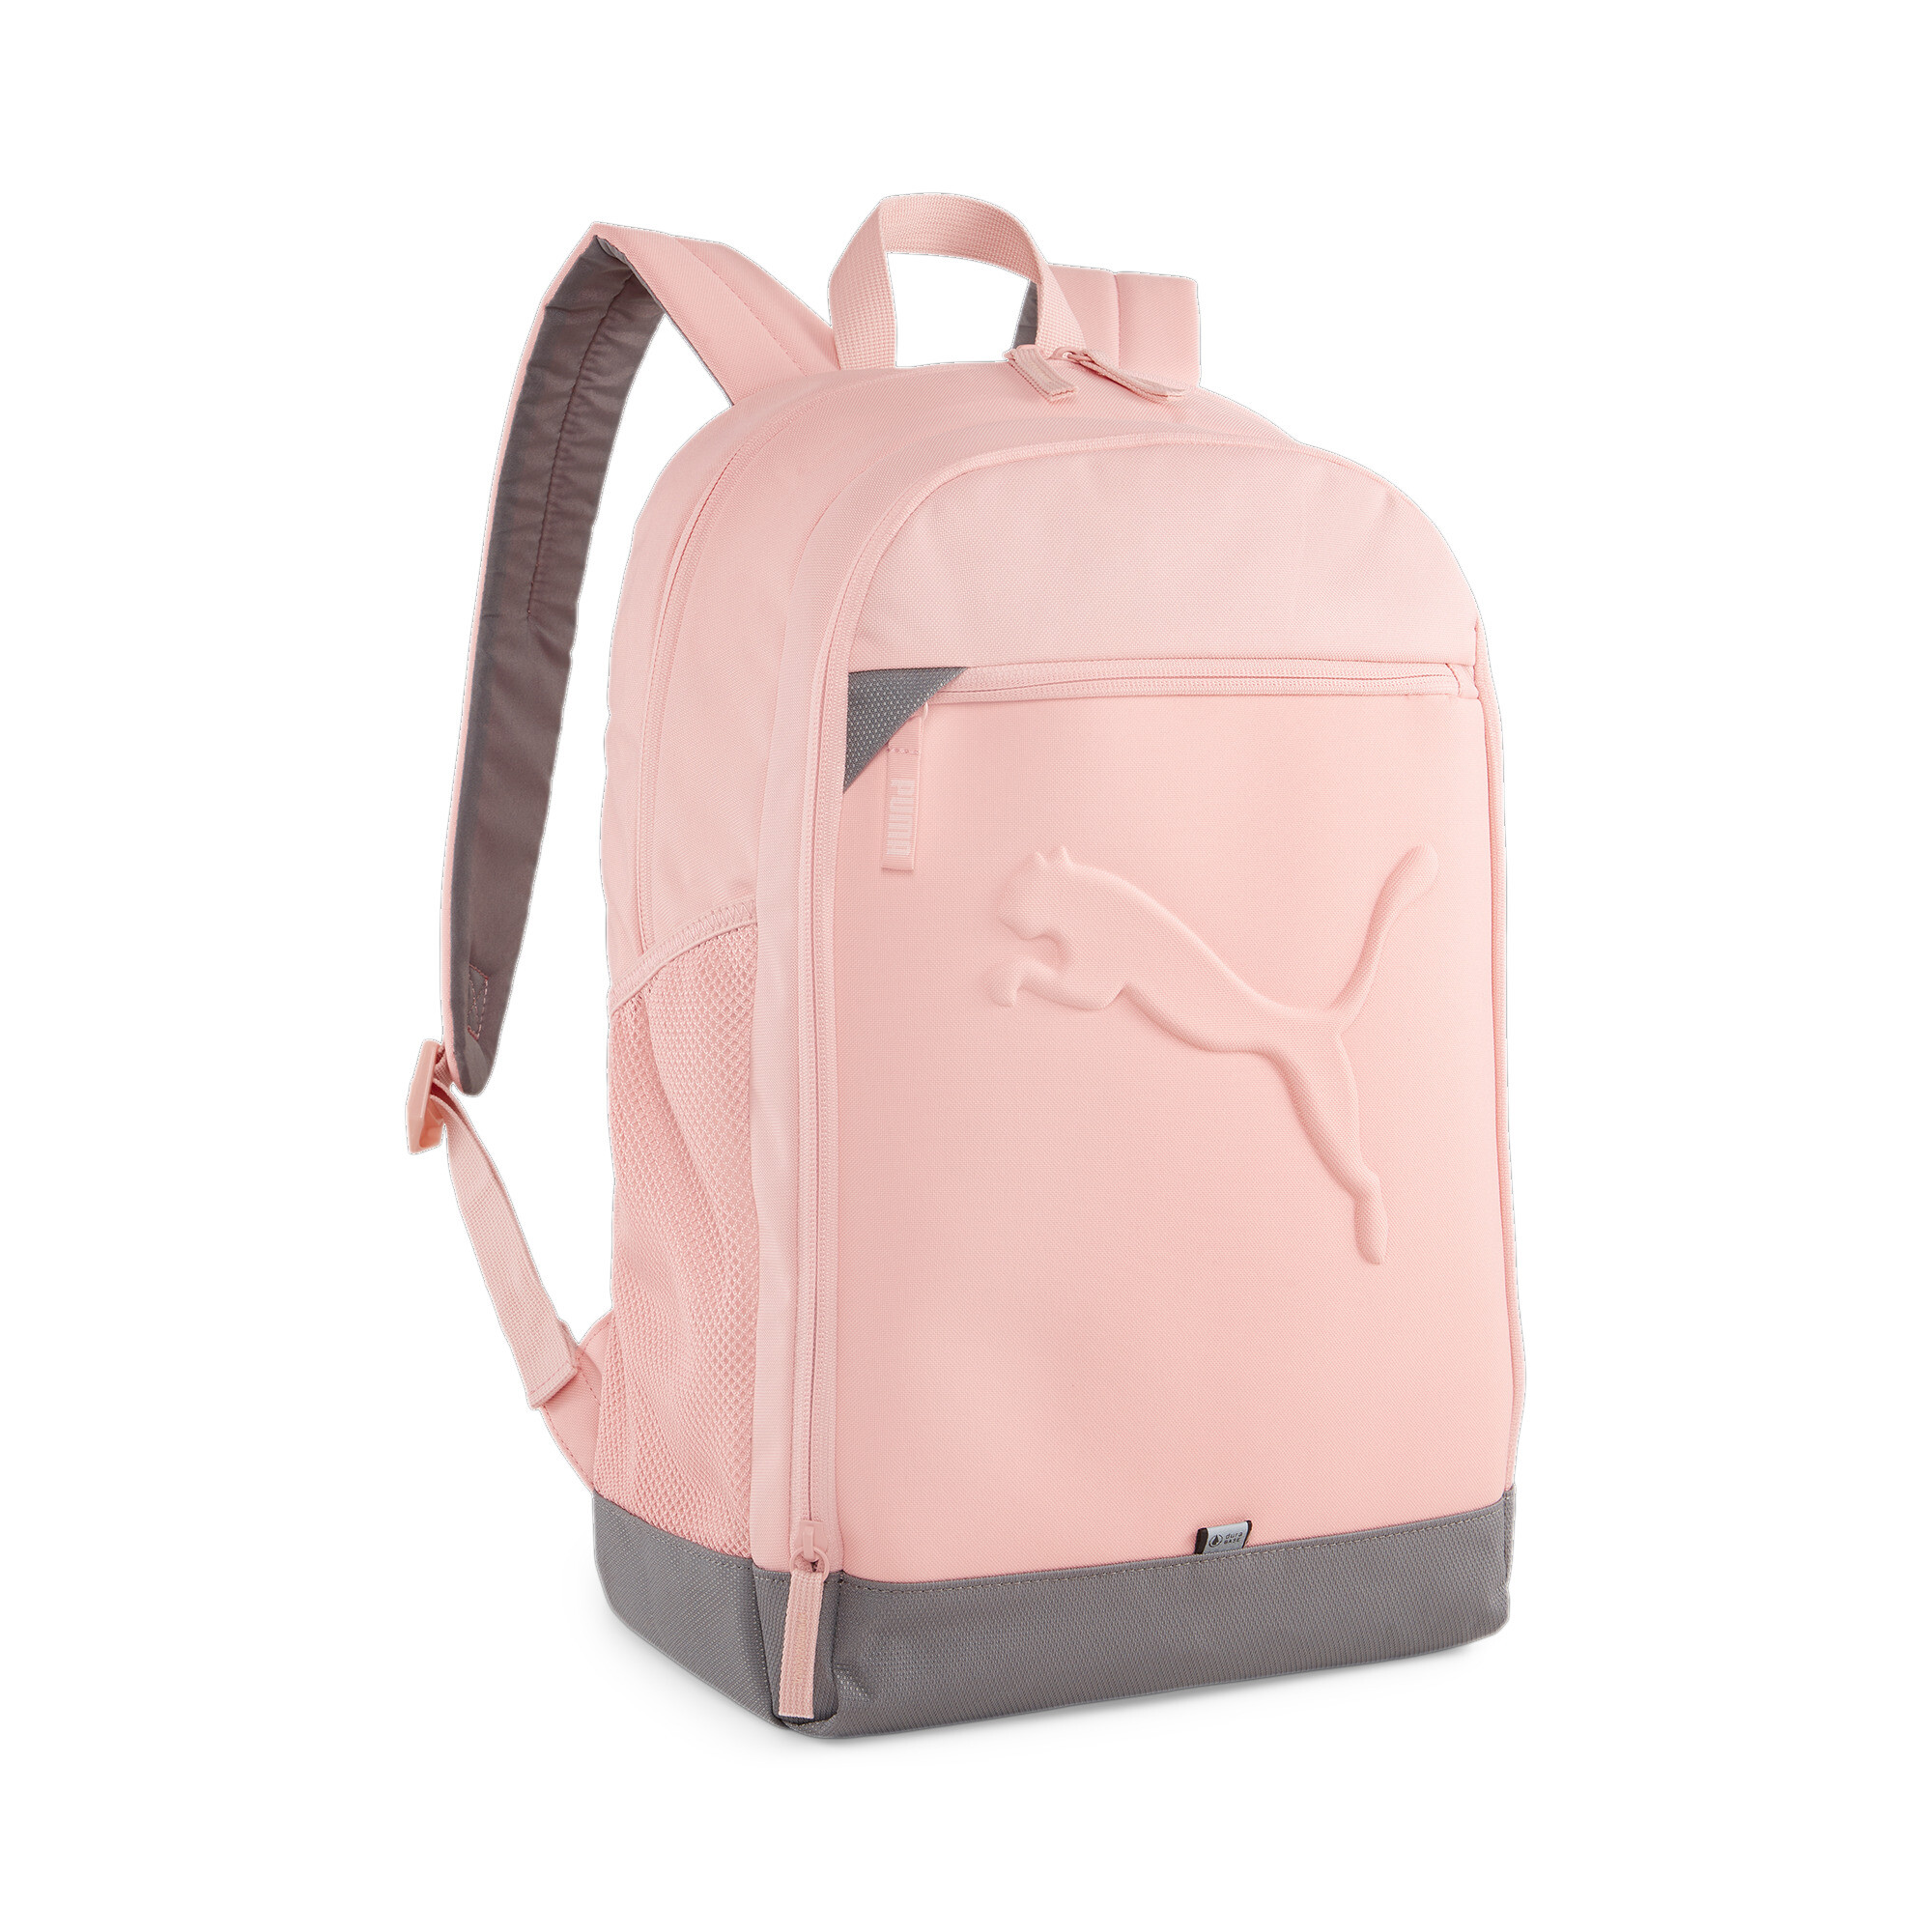 Puma Buzz Backpack, Pink, Accessories